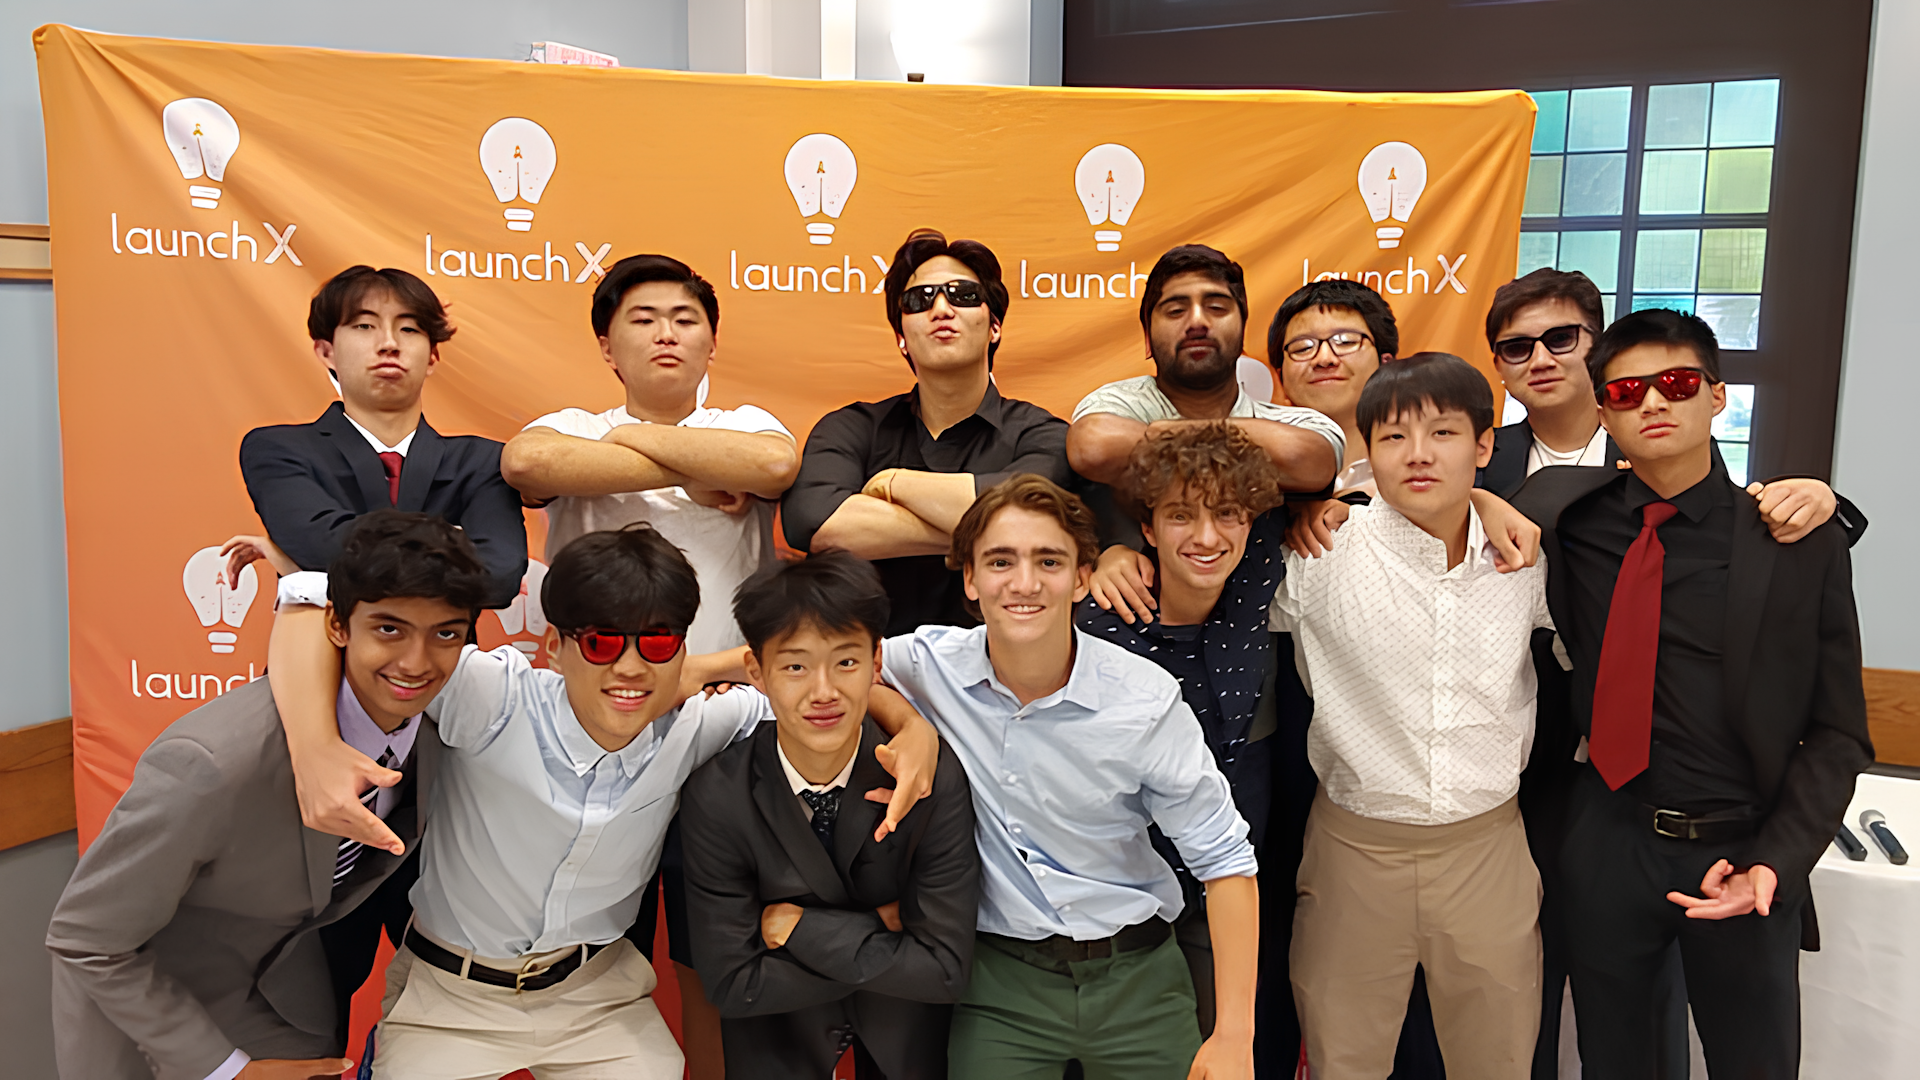 A photo of the boys at LaunchX Innovation Day